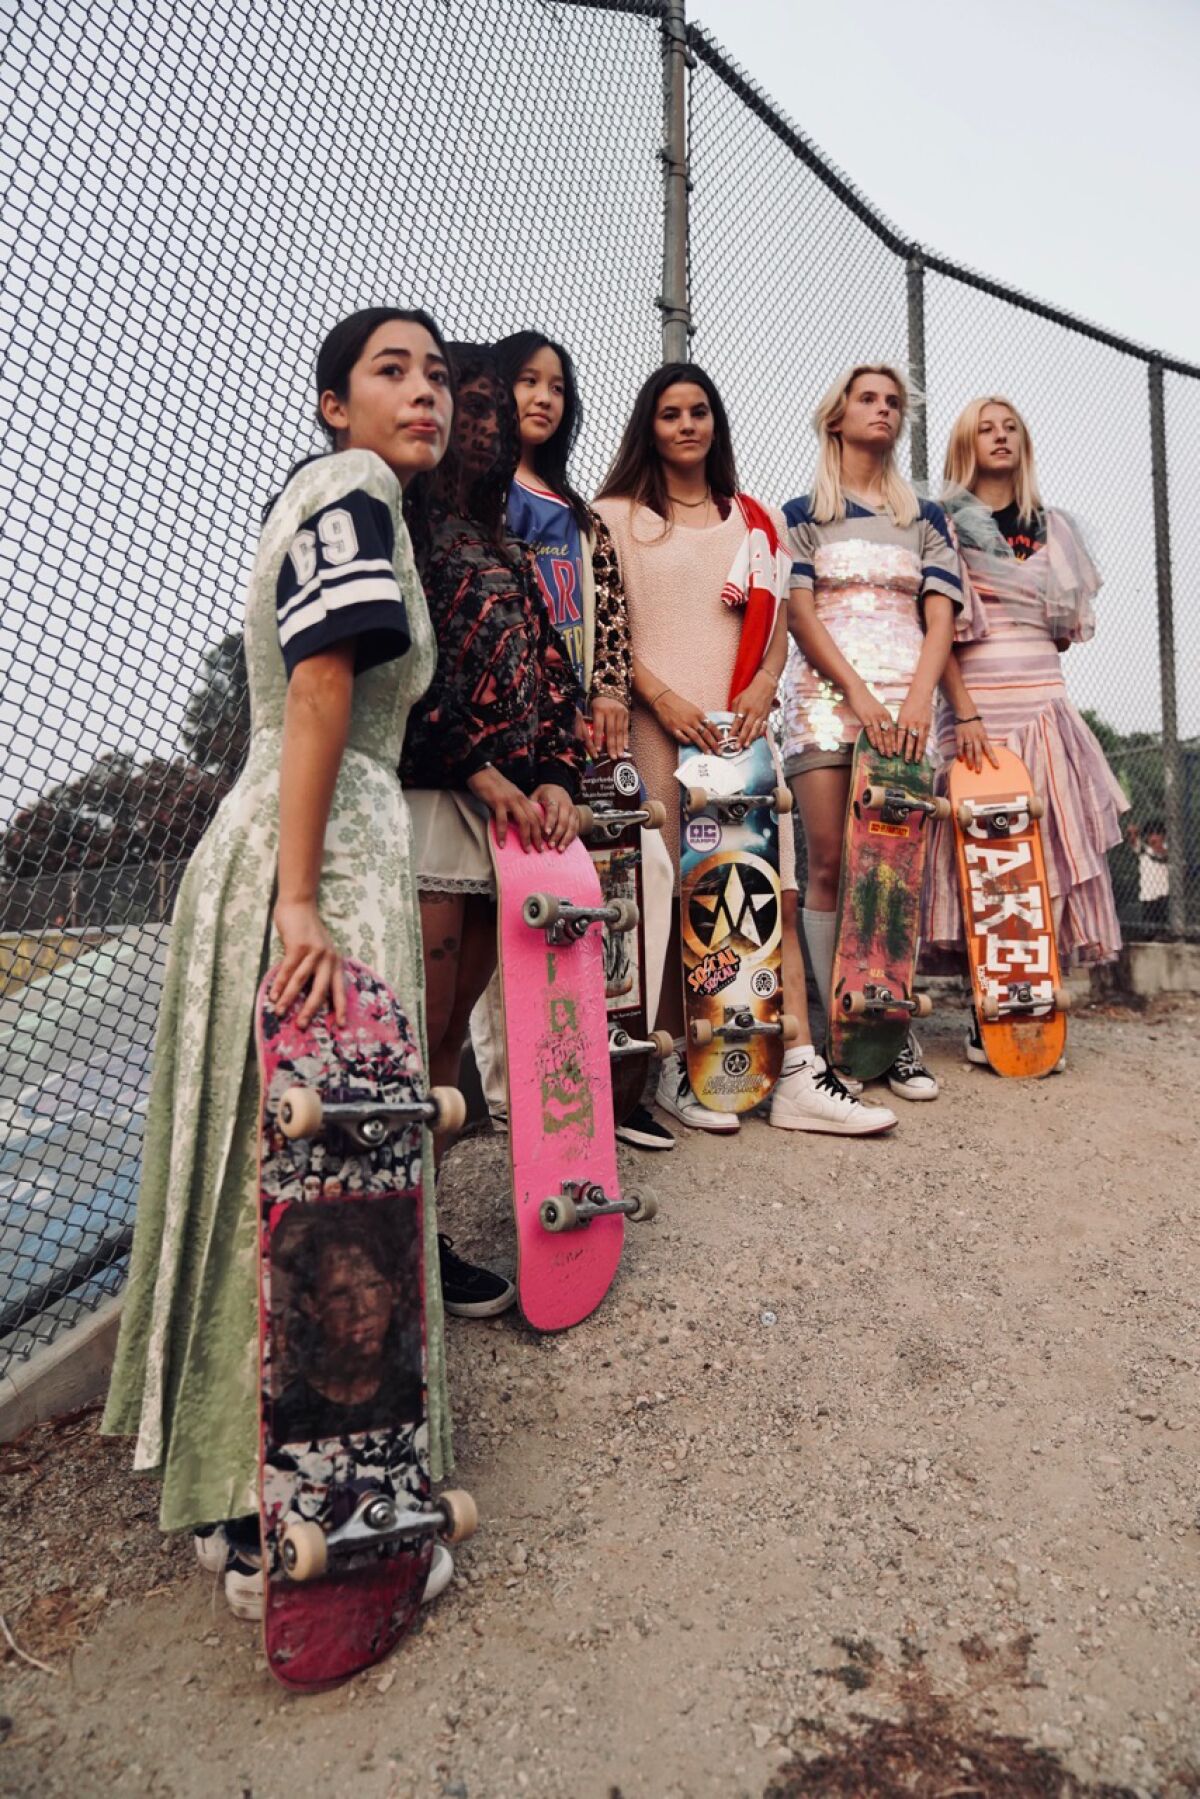 Female skaters model the latest collection from Tara Subkoff's label Imitation of Christ.